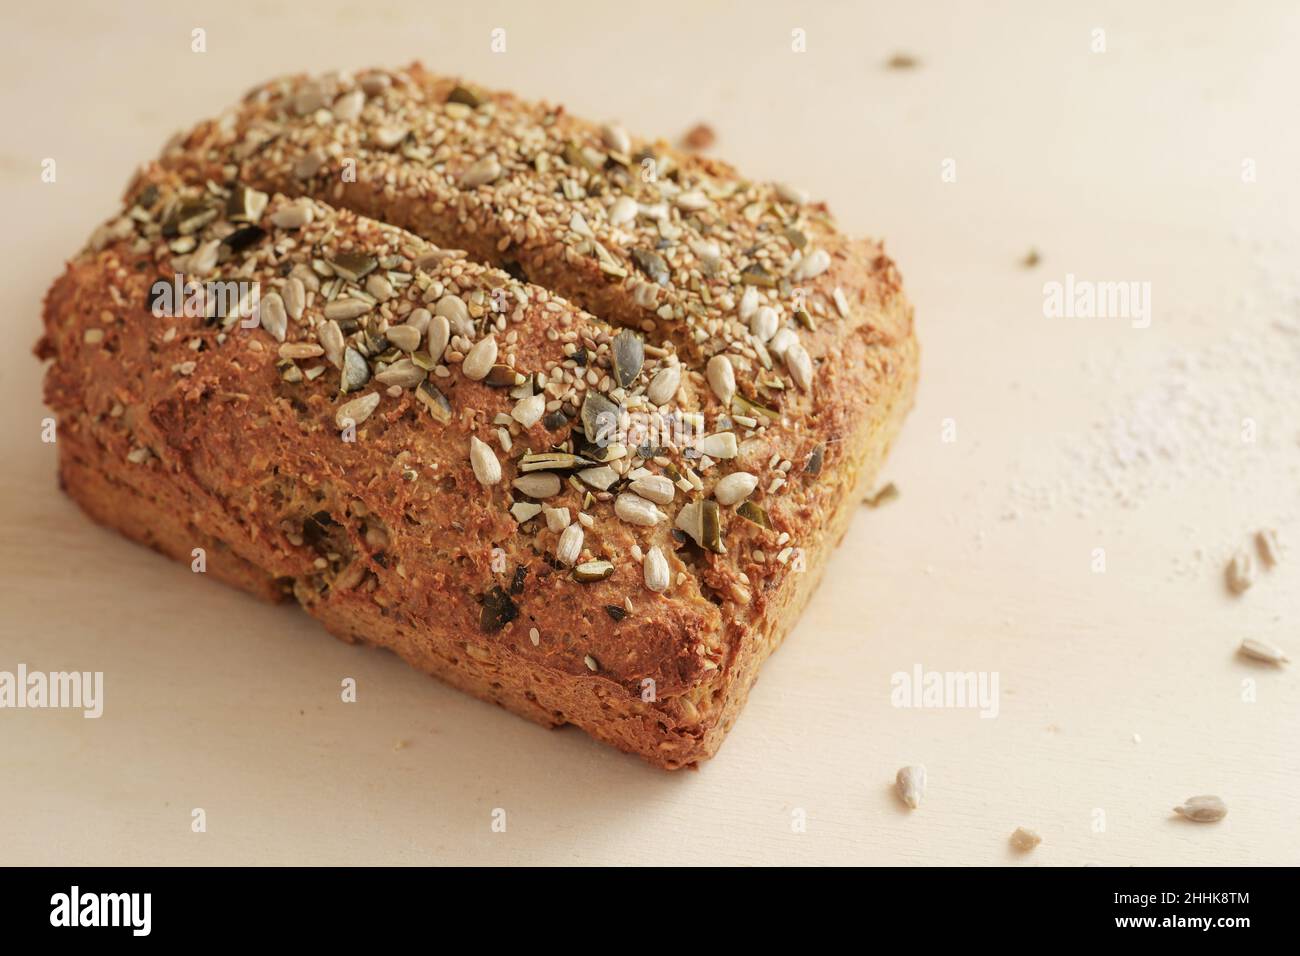 Healthy whole grain bread with seeds and kernels, homemade baking with protein and fiber for a low carb diet, copy space, selected focus, narrow depth Stock Photo